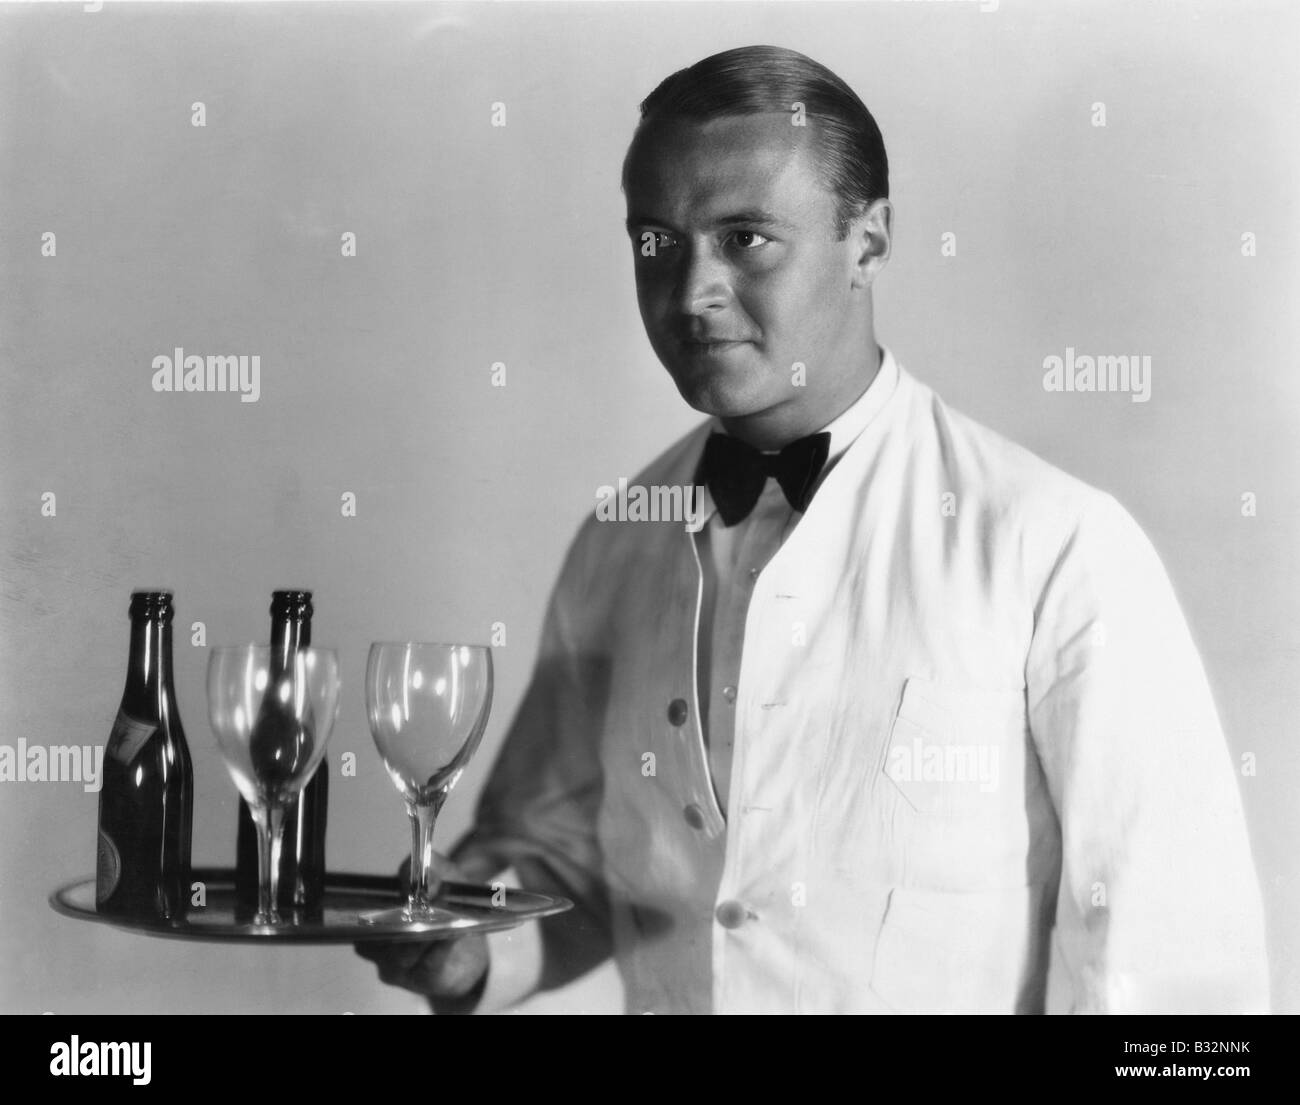 Waiter with beverages on tray Stock Photo